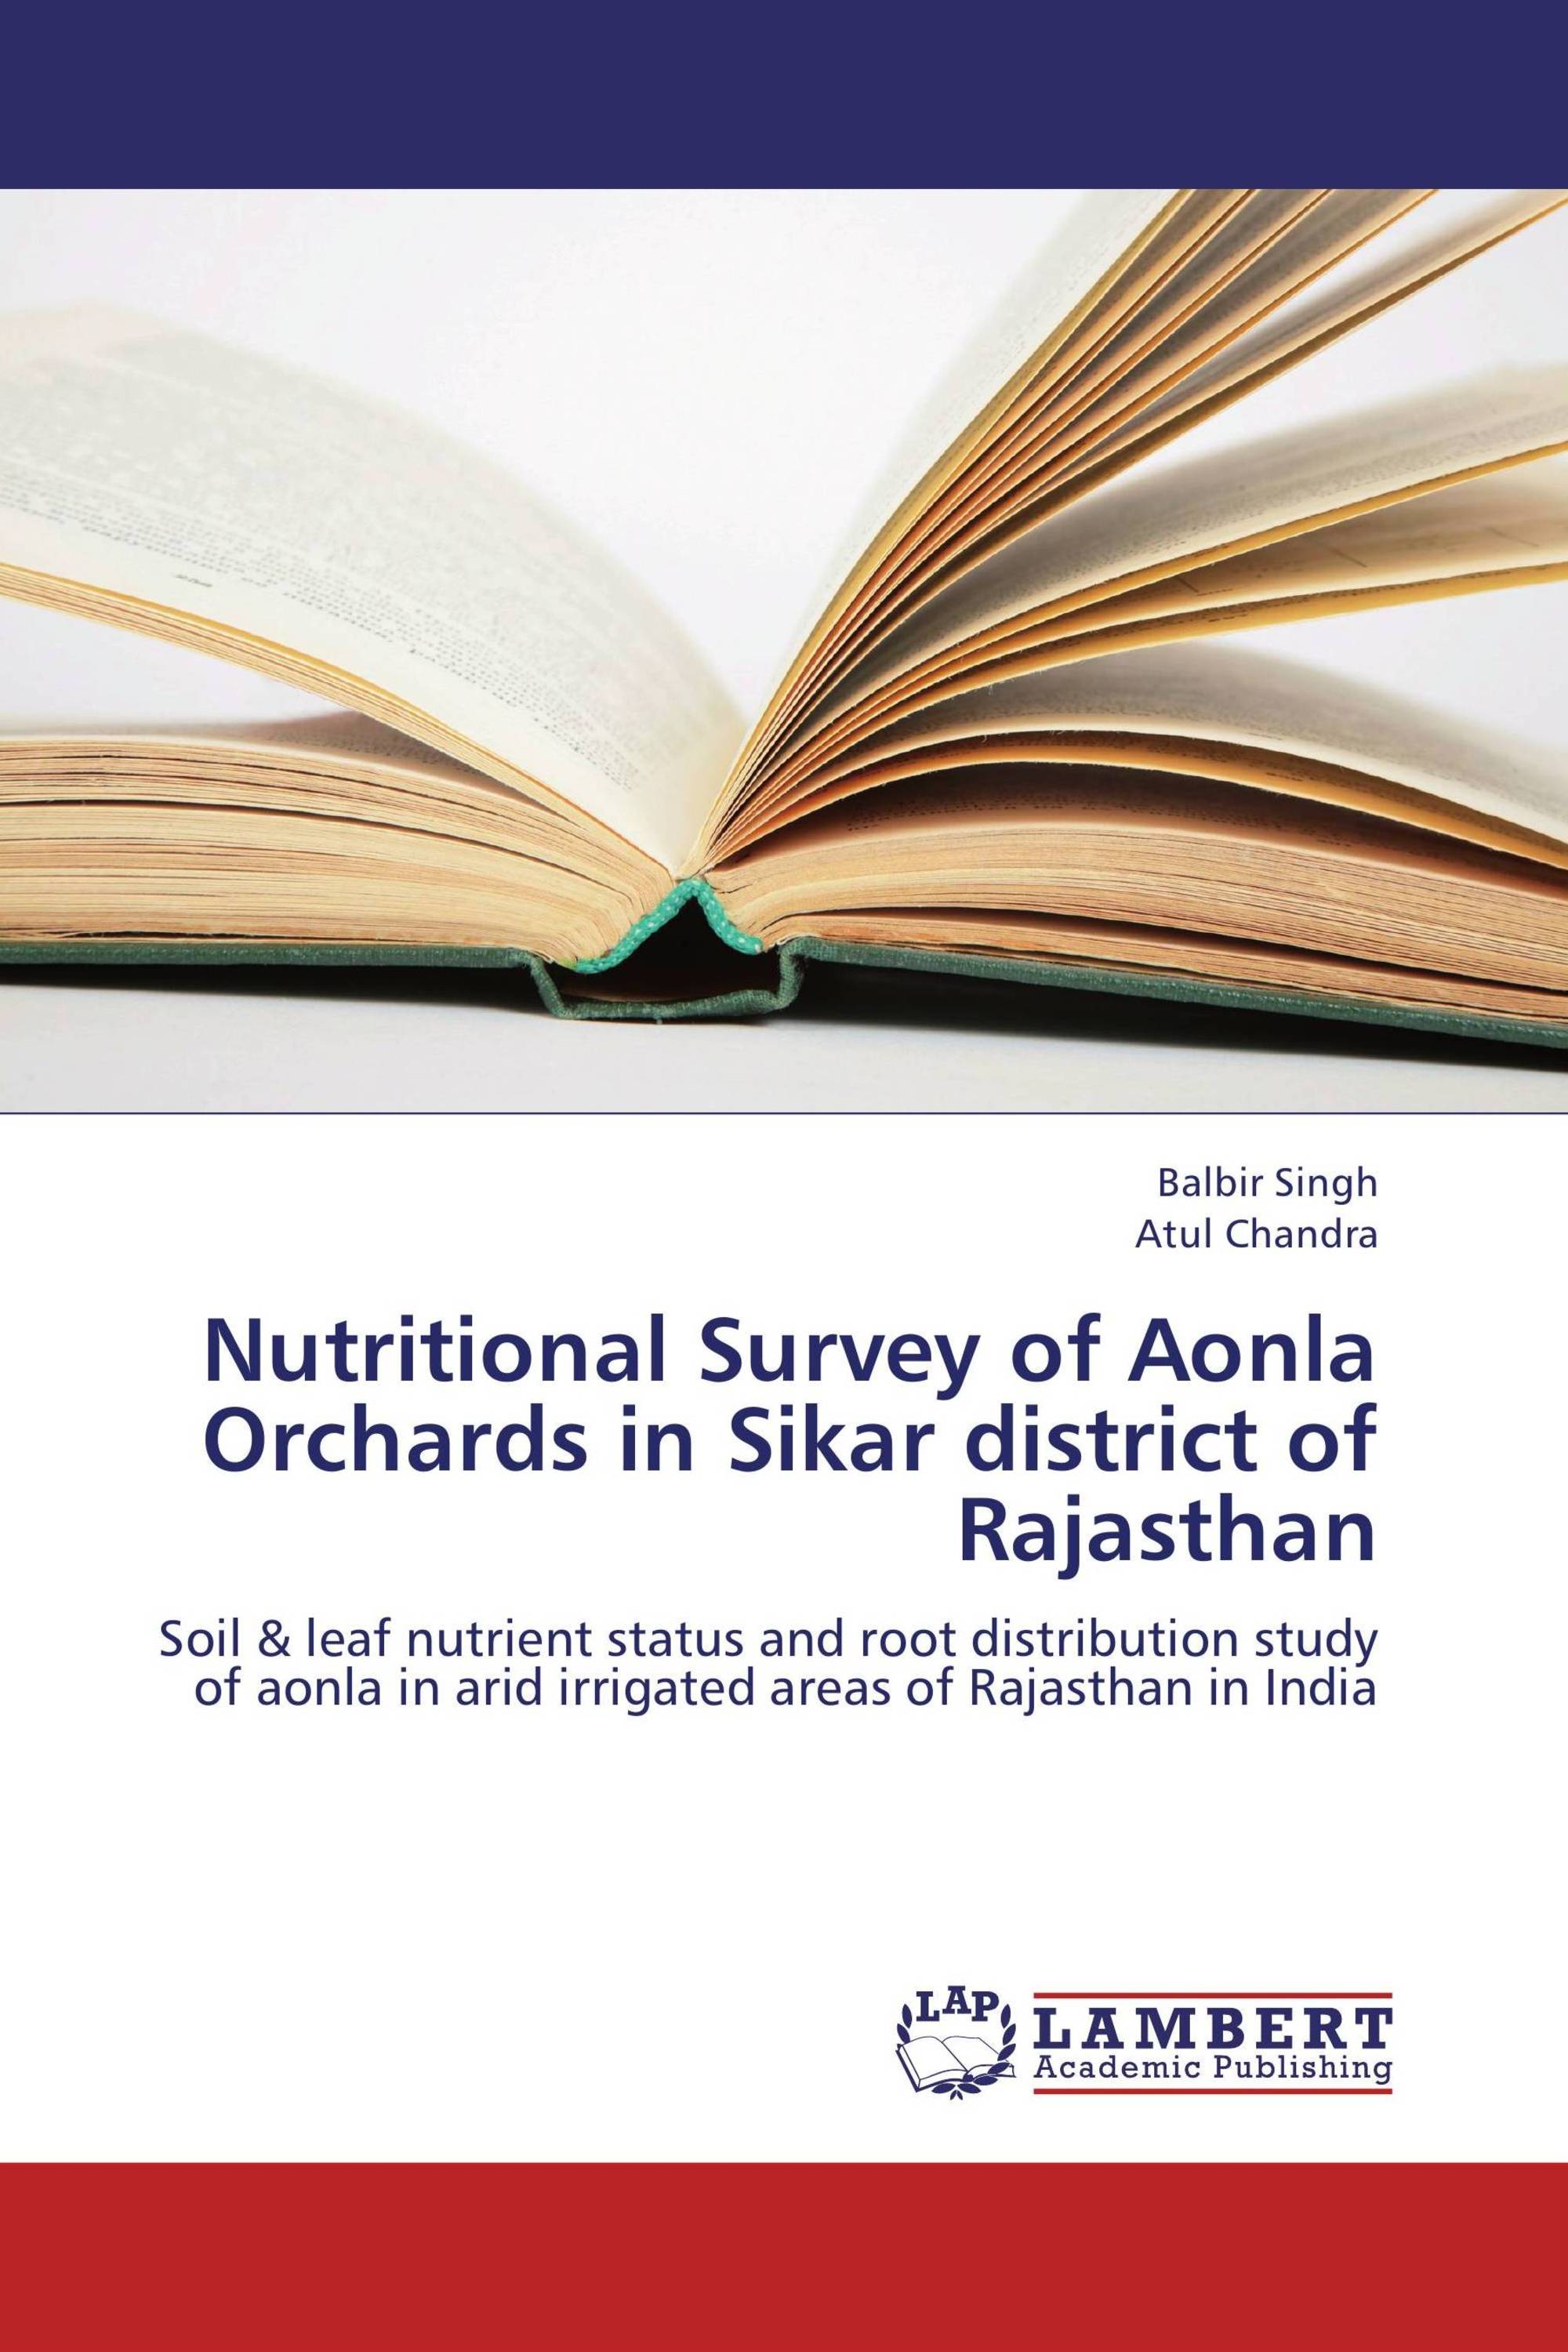 Nutritional Survey of Aonla Orchards in Sikar district of Rajasthan